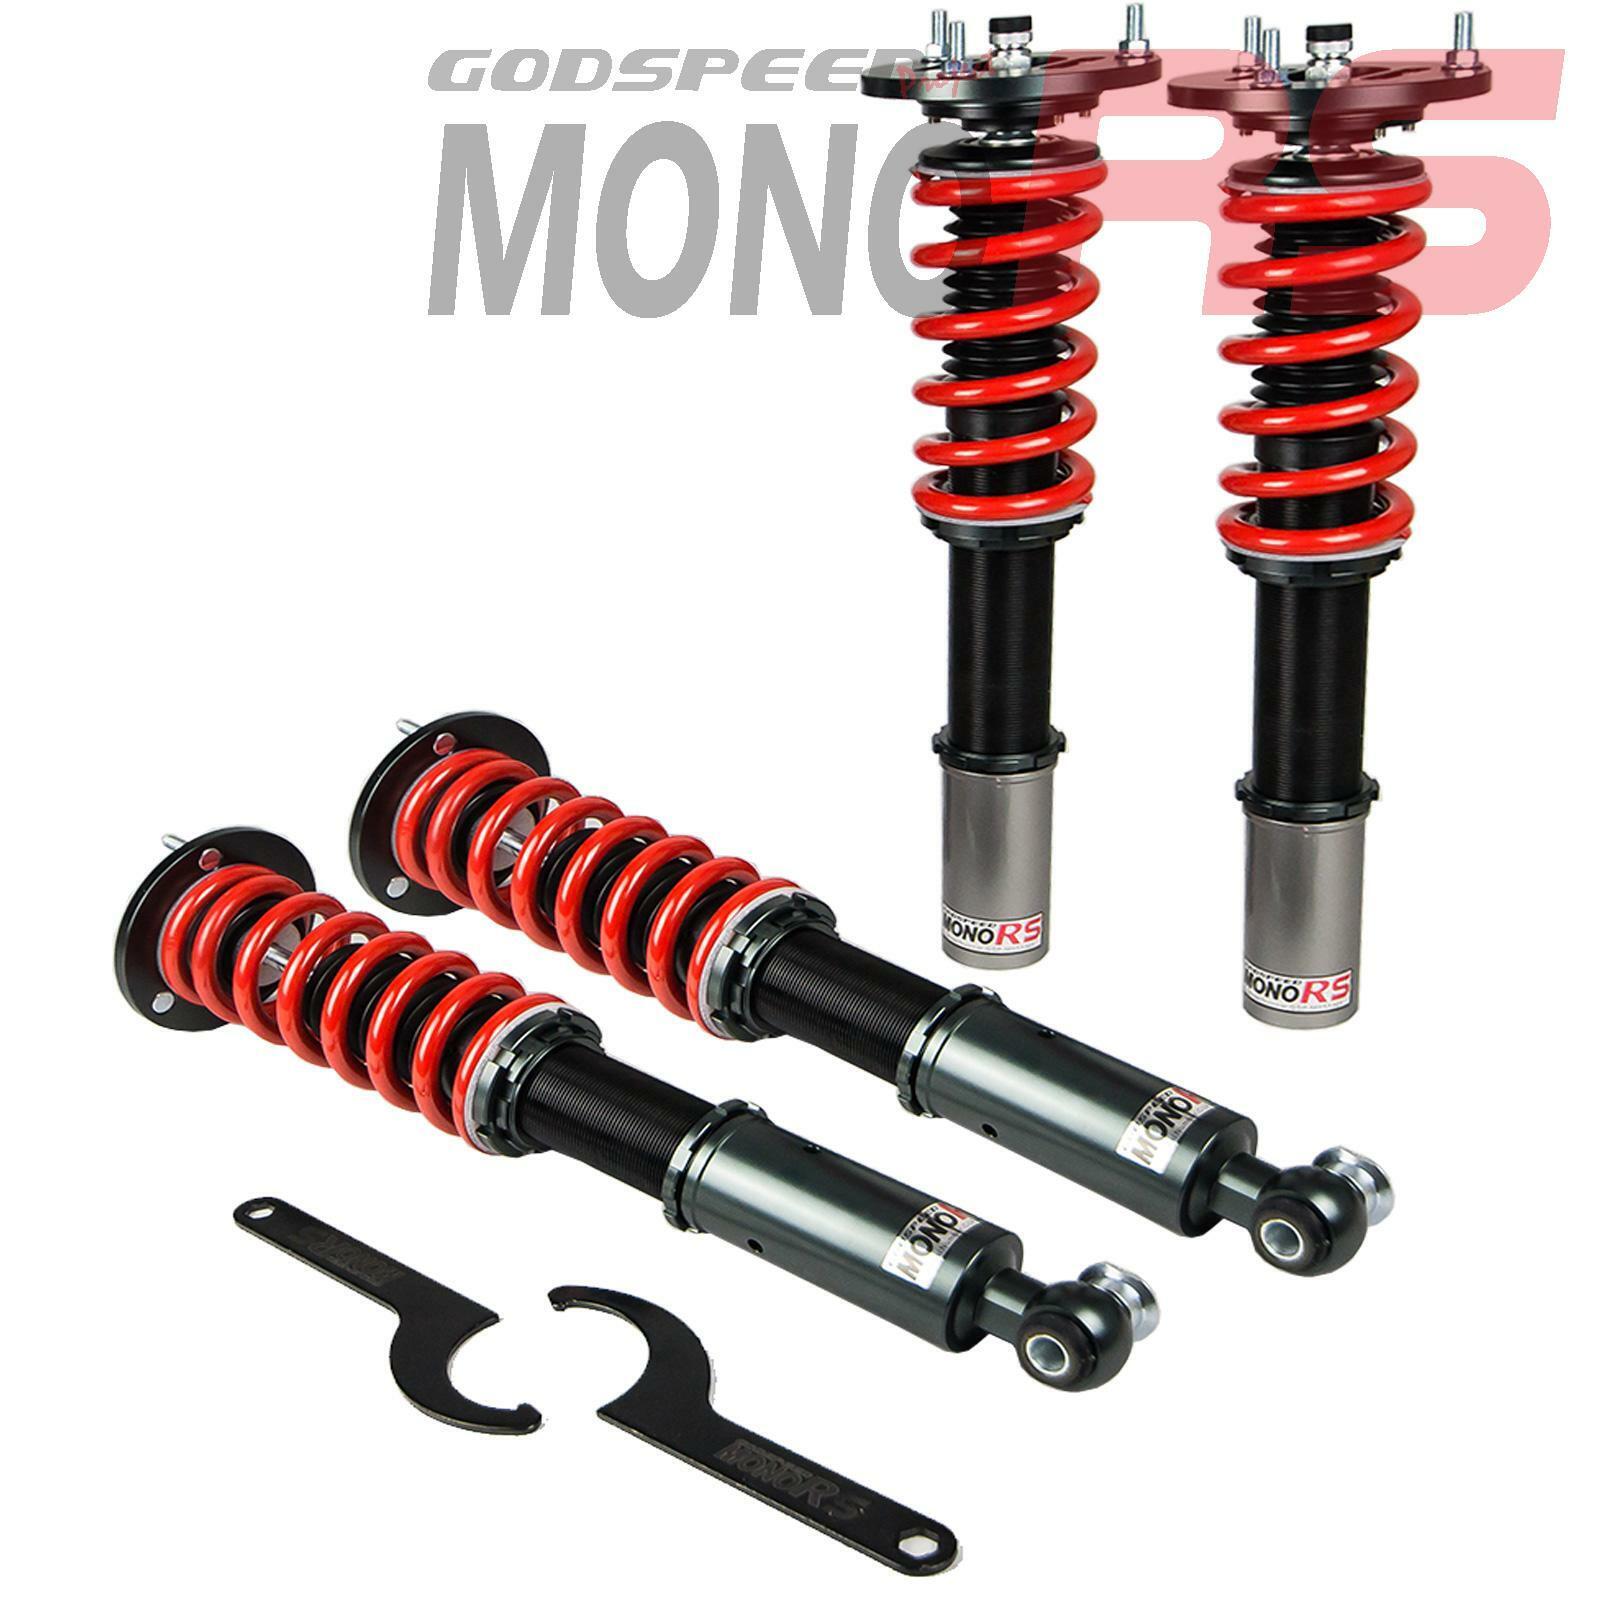 Godspeed(MRS1920) MonoRS Coilovers for BMW 5-Series(E39) 96-03, Fully Adjustable